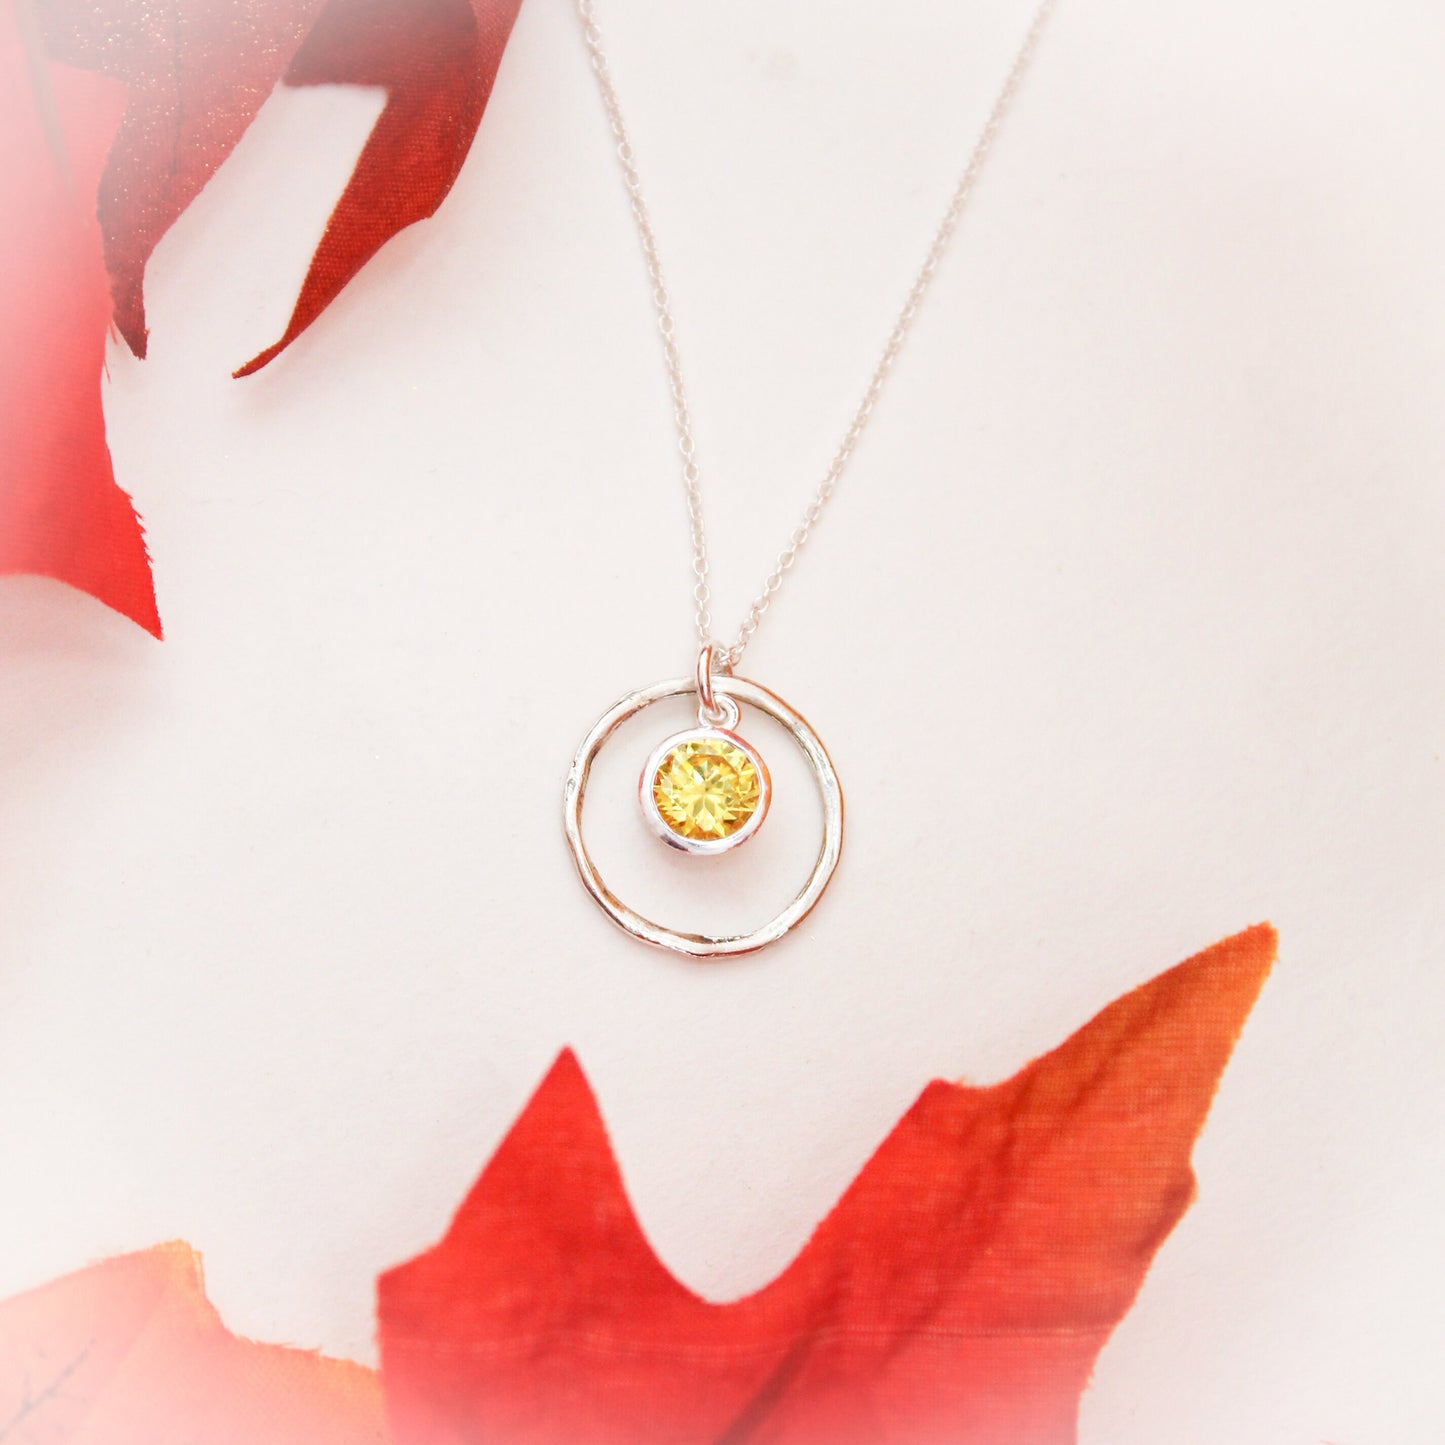 November Birthstone Necklace, November Yellow Topaz Jewelry, November Birthday Gift, November Birthstone Jewelry, Sterling Silver Necklace